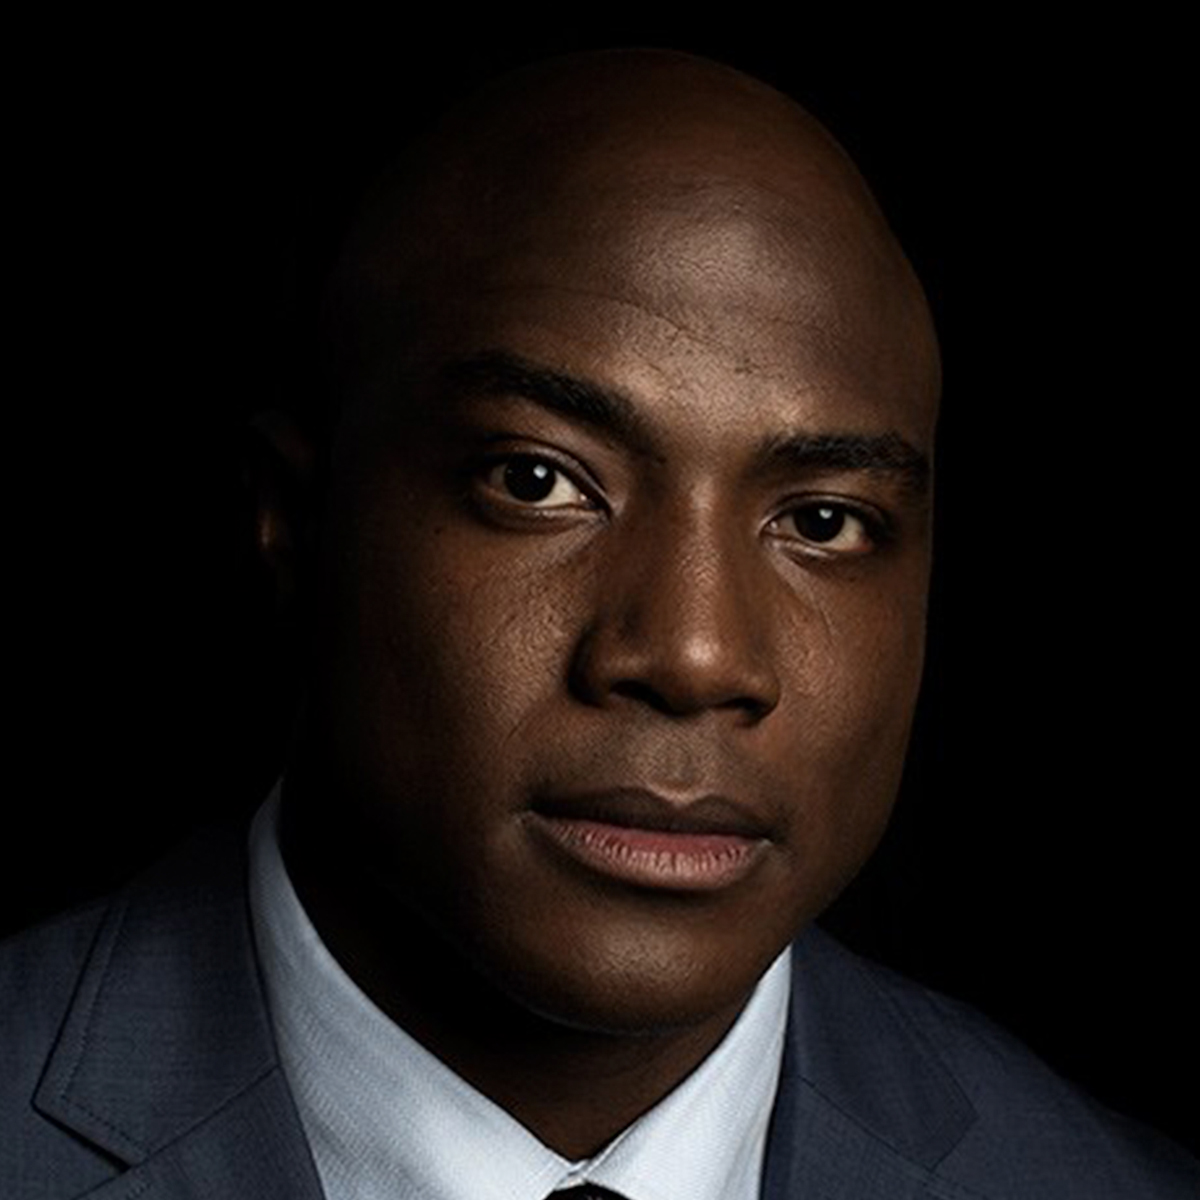 DeMarcus Ware Shares How to Bring Dairy Back to the Athlete’s Diet